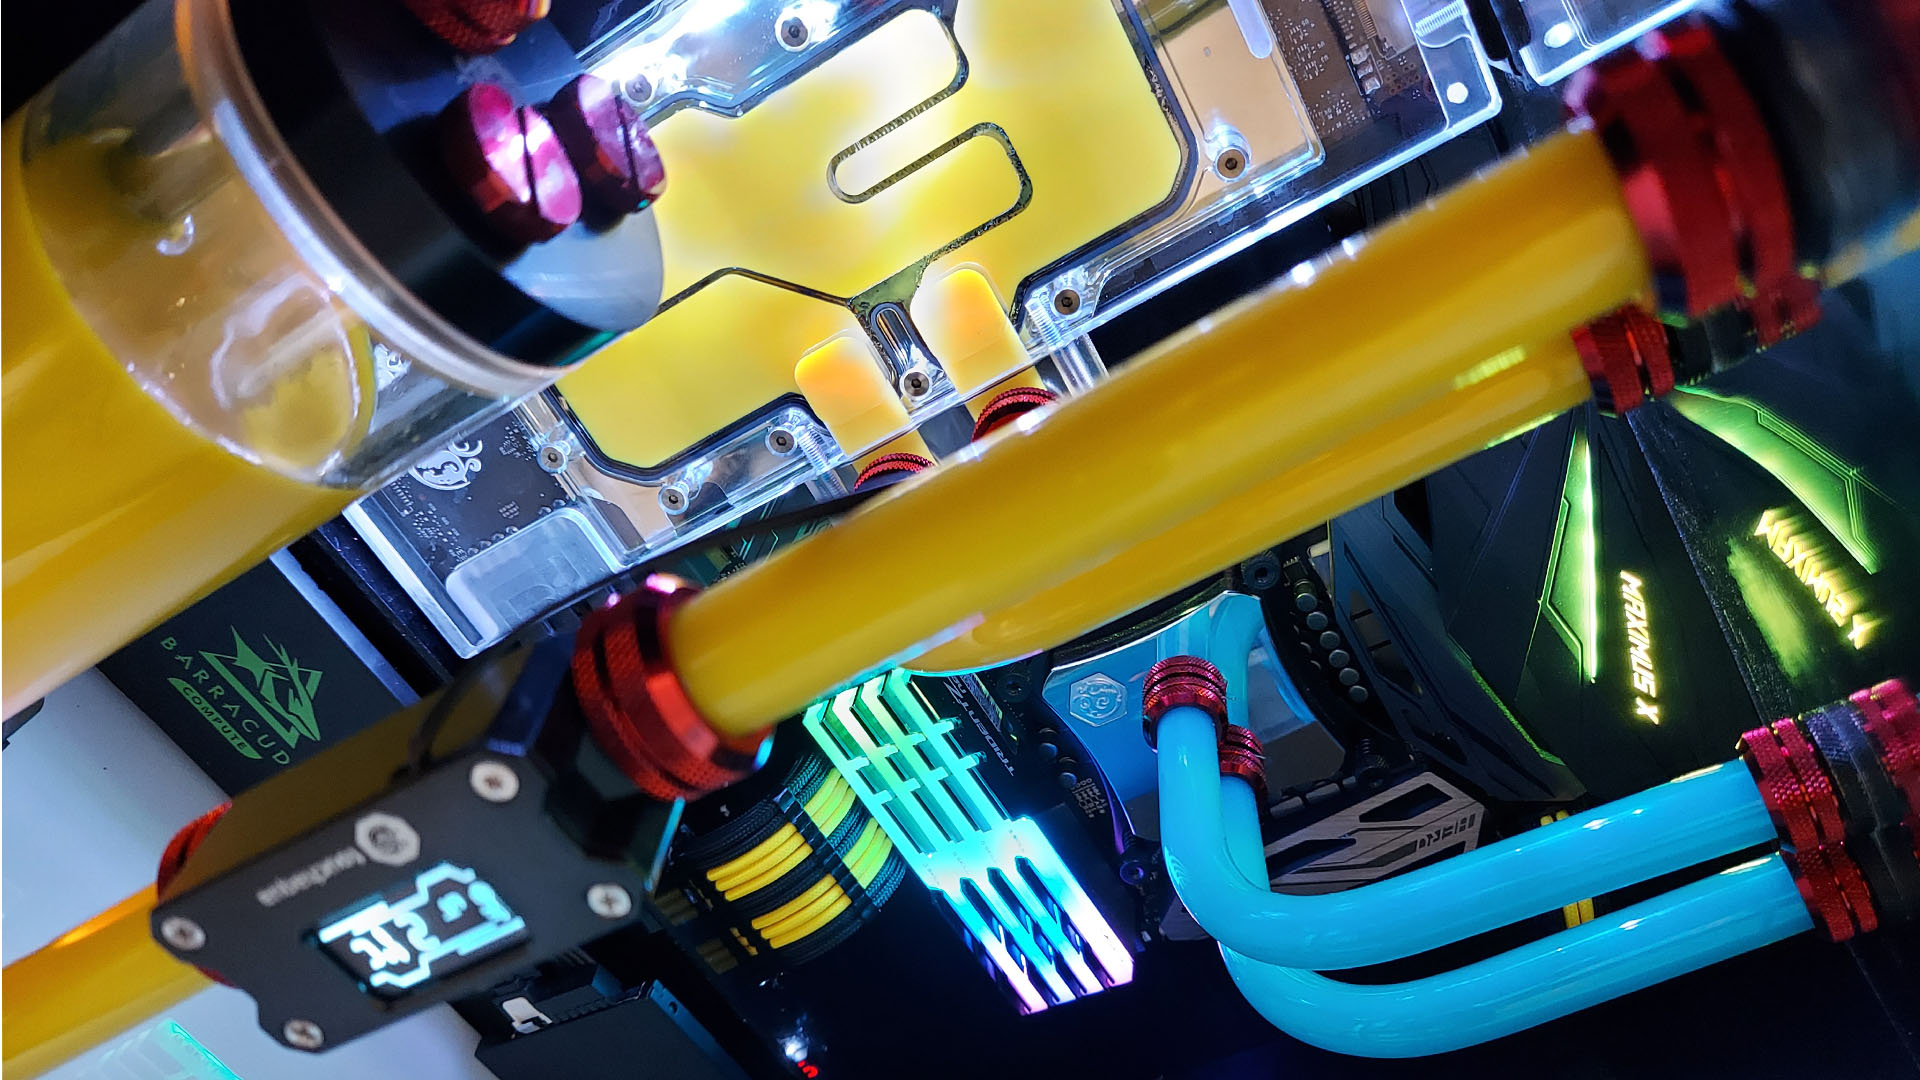 The yellow and blue water-cooled system inside a Pac-Man gaming PC